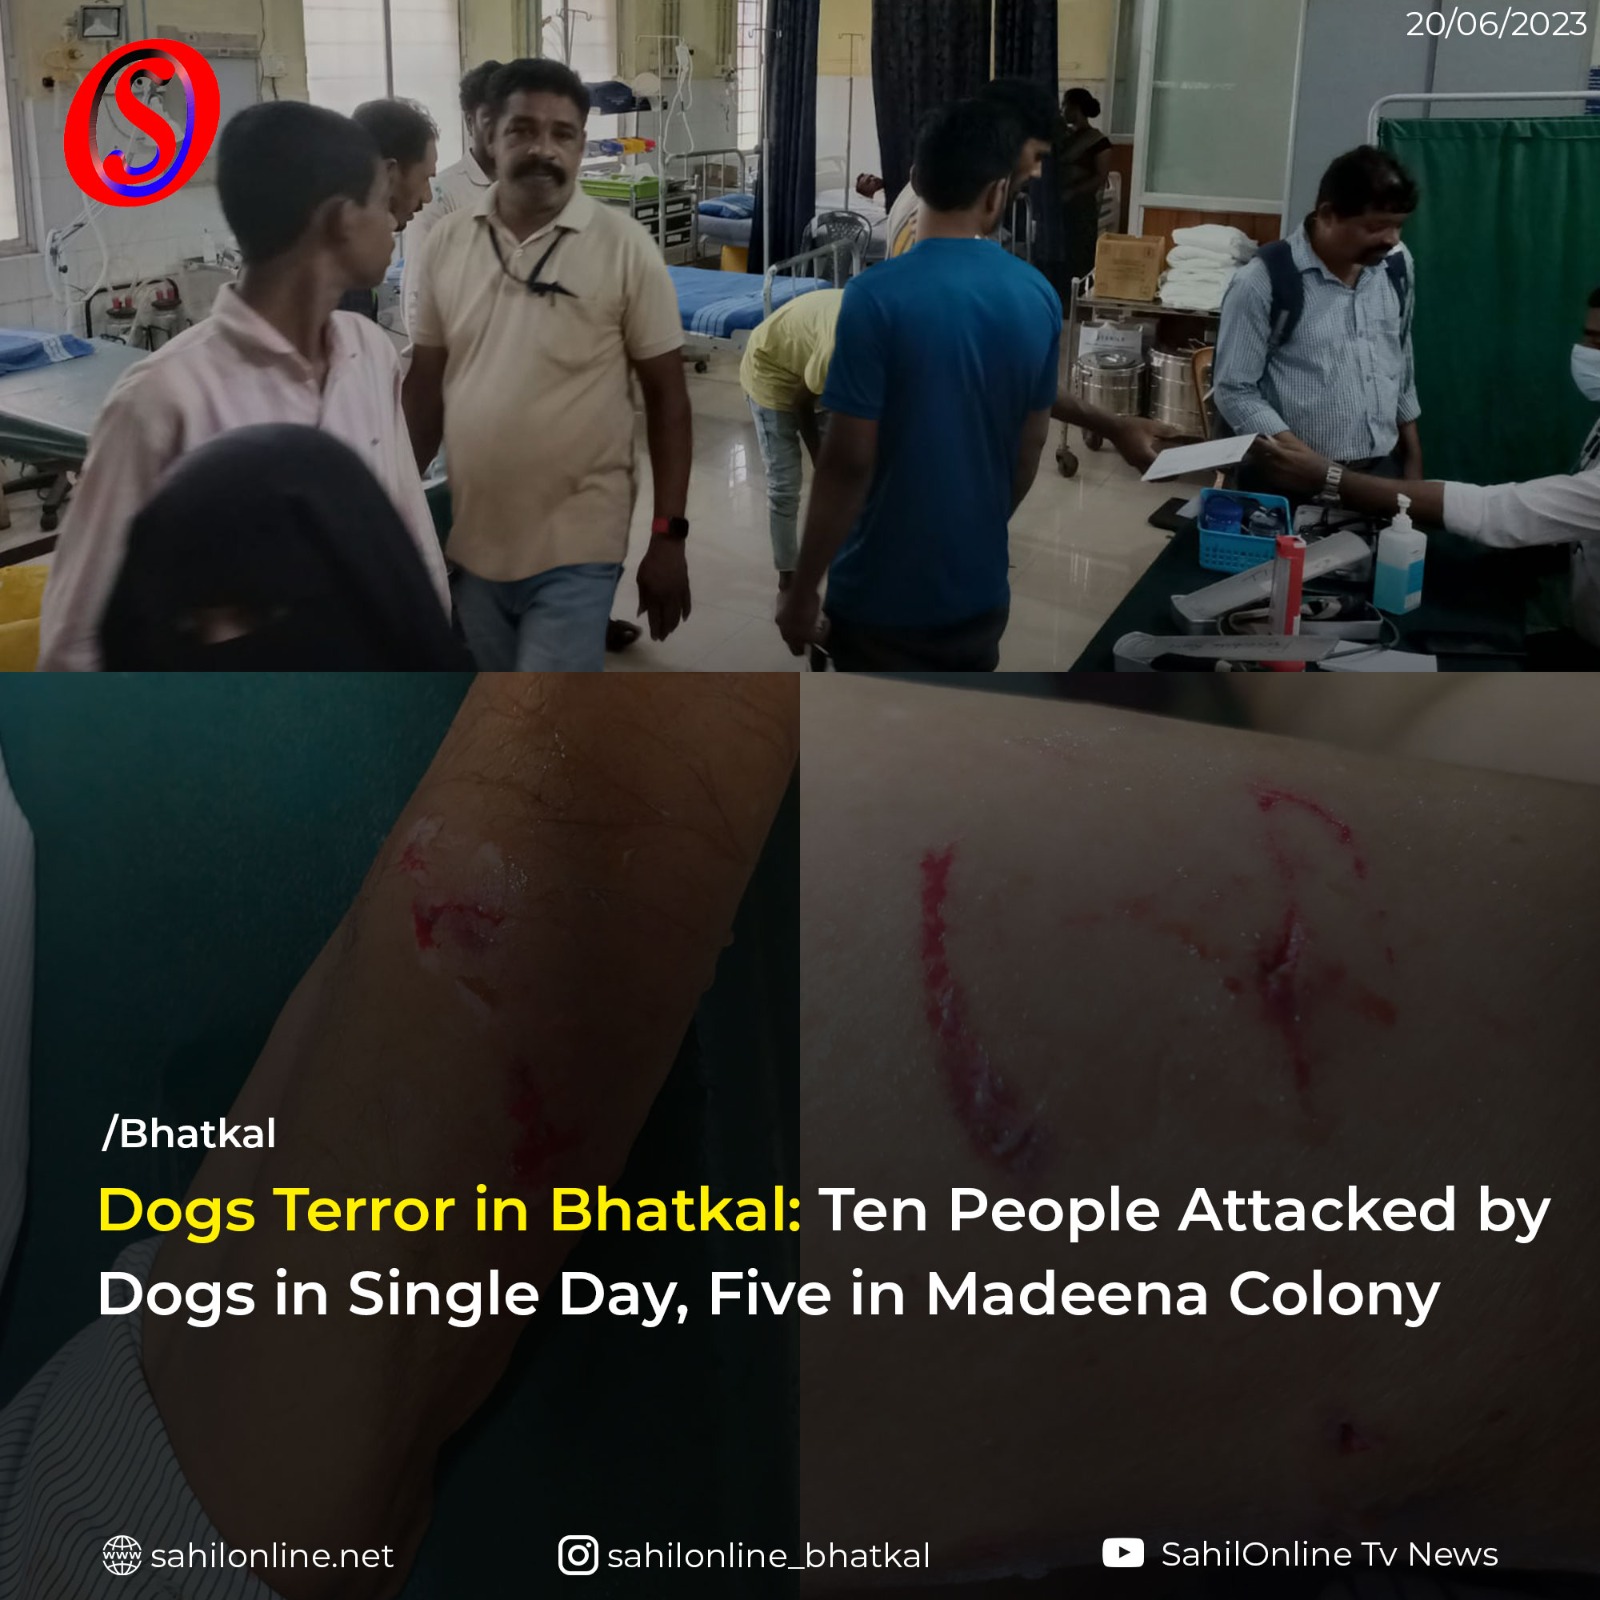 More than 10 injured in stray Dog Attacks, concerns raised in Bhatkal